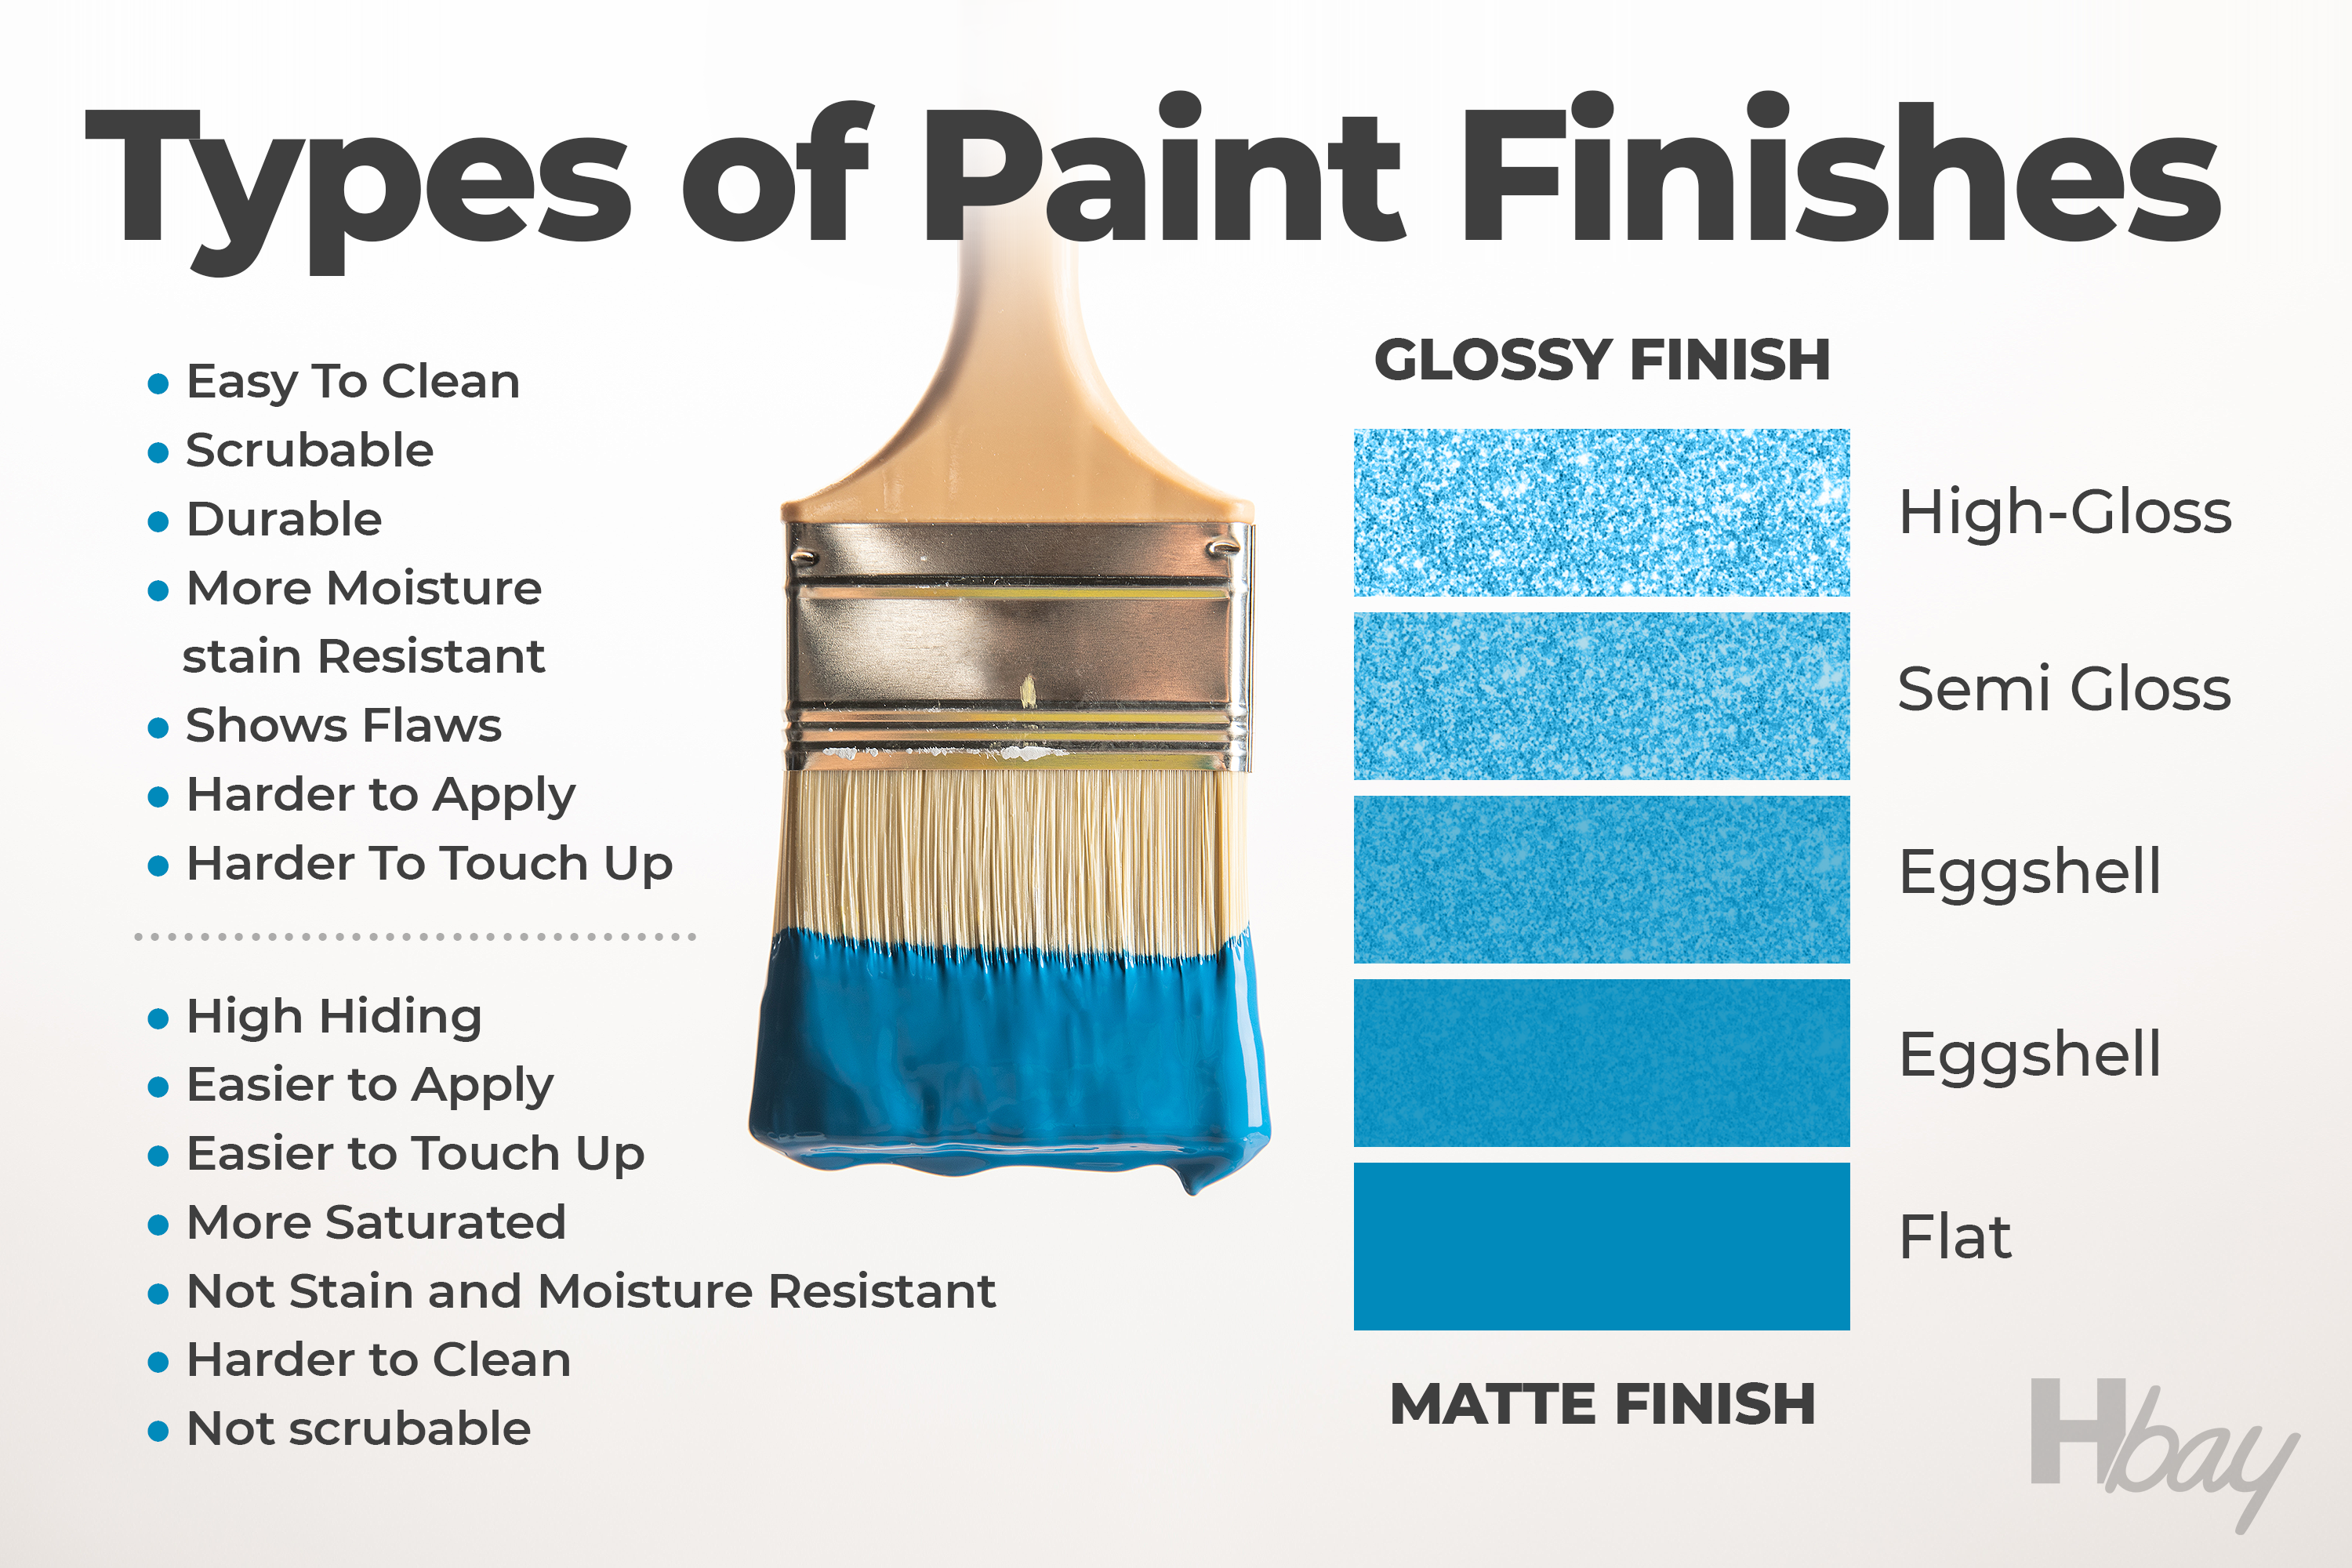 How to Make Glossy Paint Look Flat